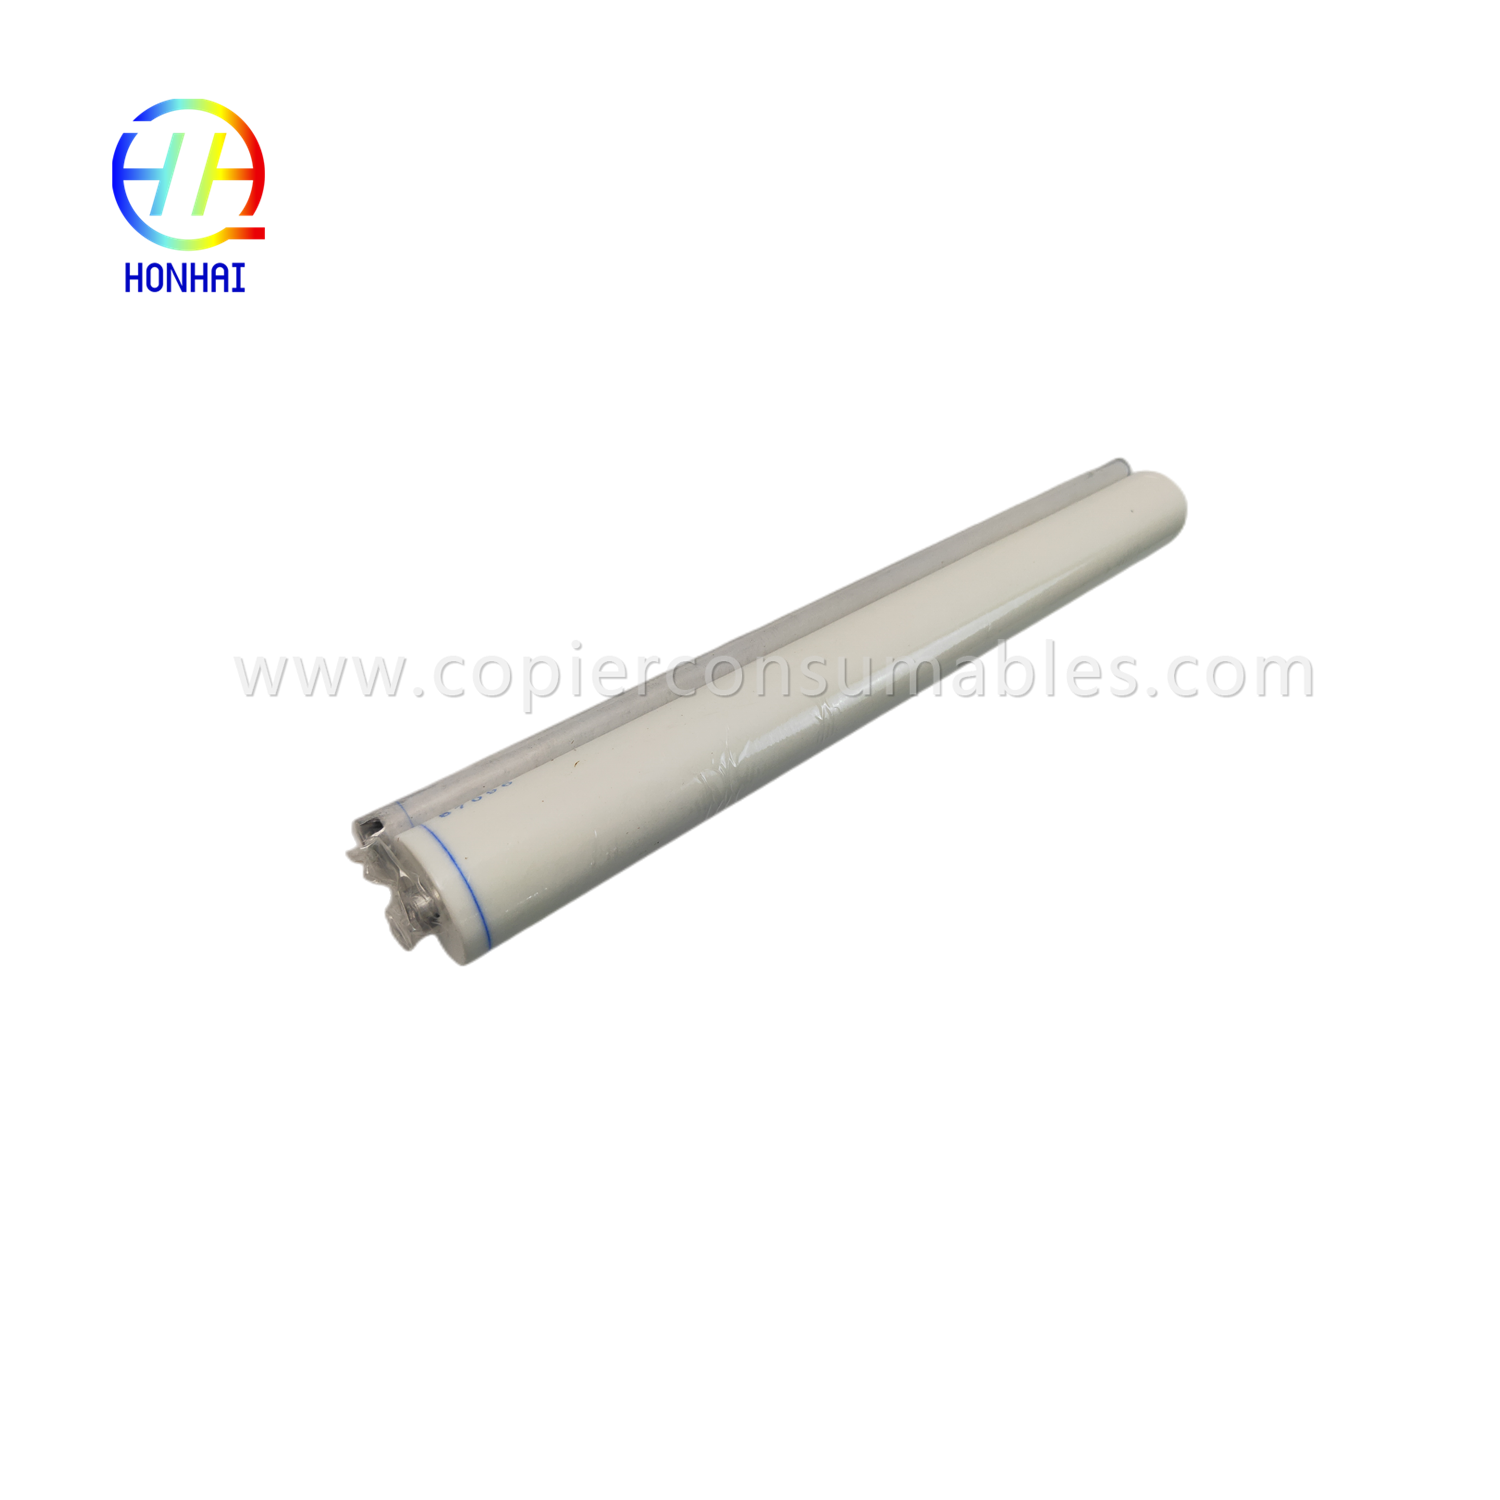 Fuser Cleaning Web para sa Canon IR6800 iR 8085 8095 8105 8205 8285 8295 FQ-009 FC5-2286-000 OEM Fuser Cleaning Fuser Roller